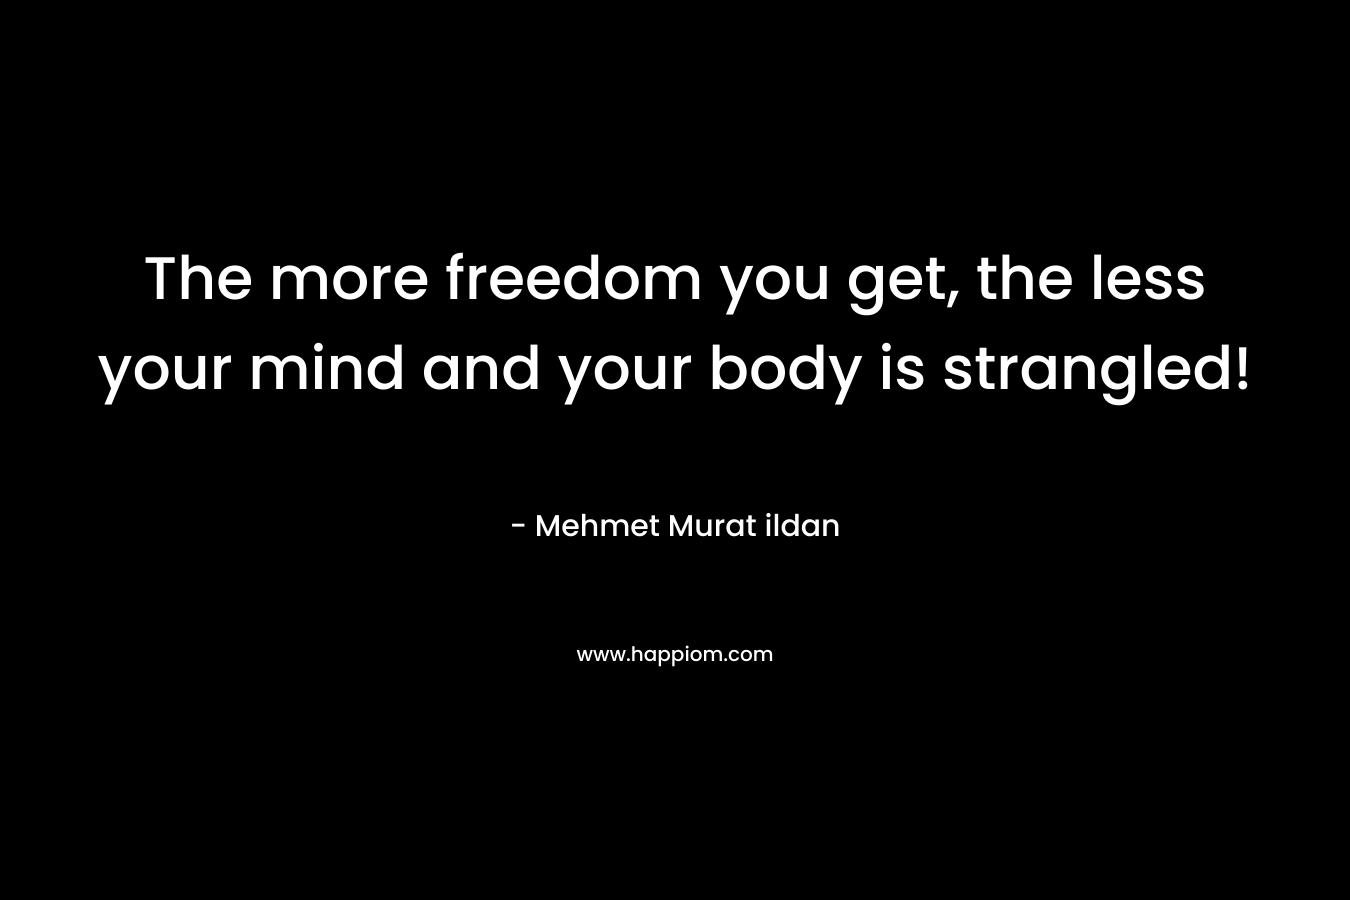 The more freedom you get, the less your mind and your body is strangled!